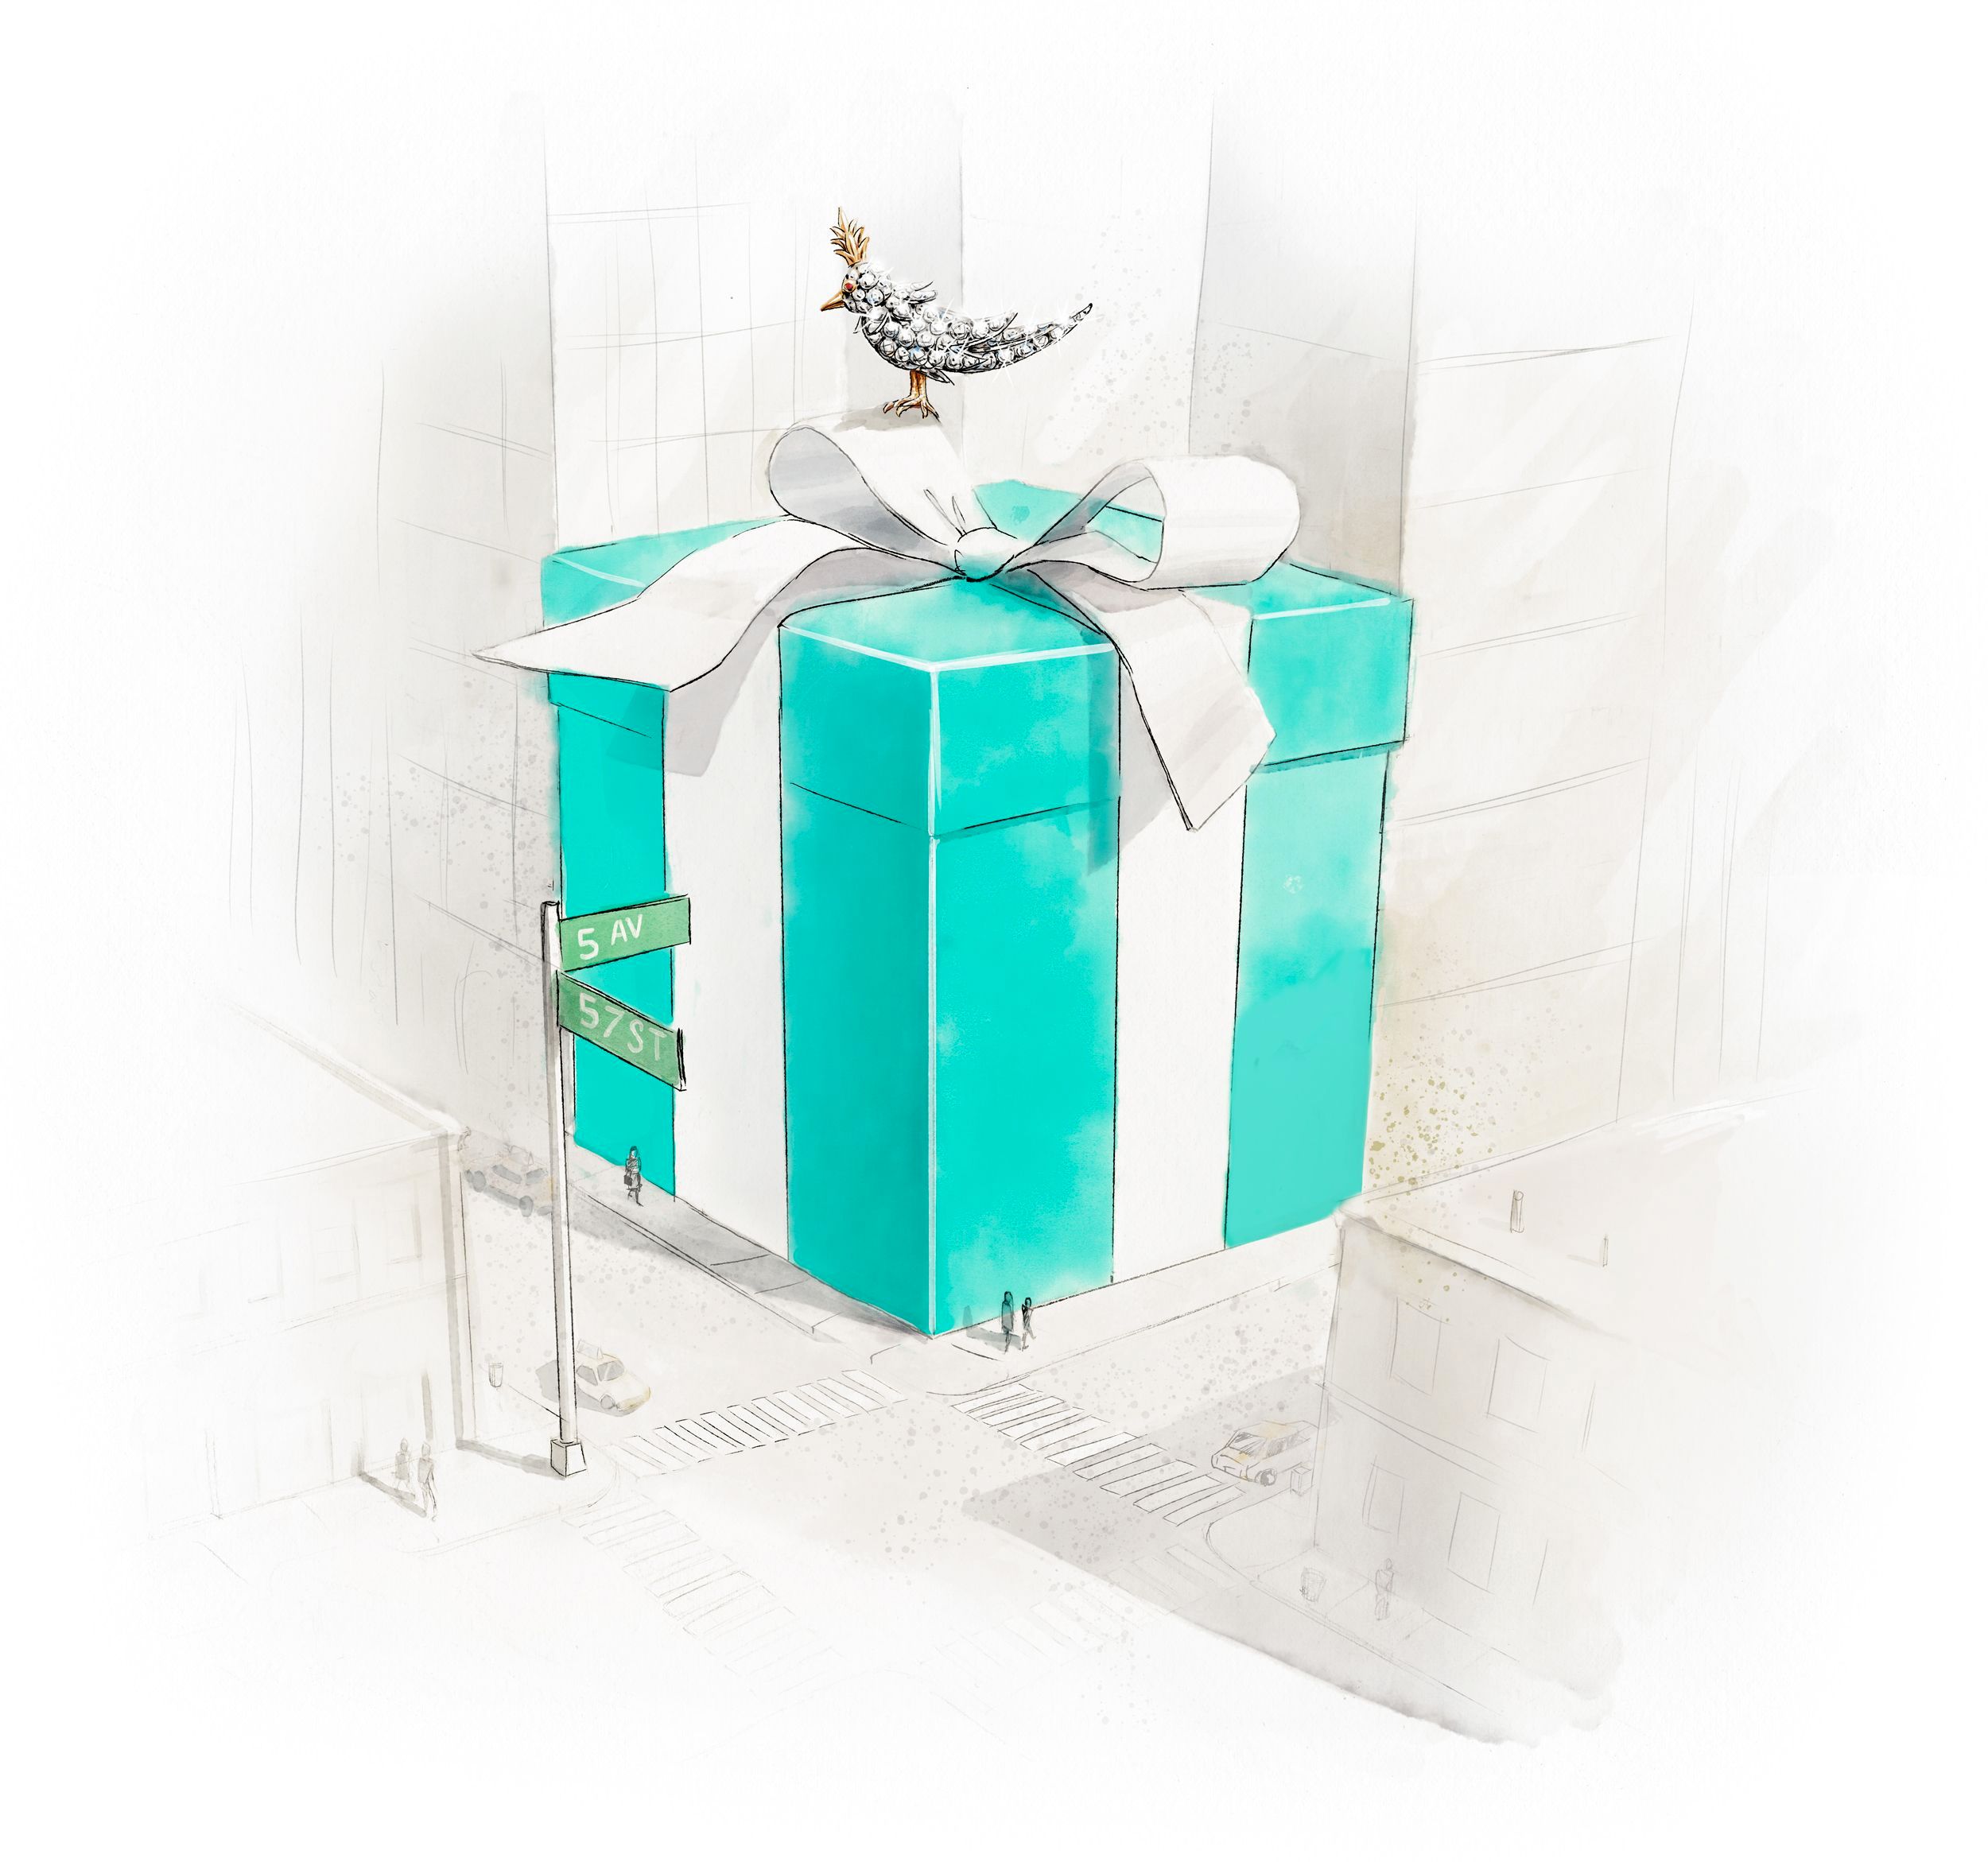 Tiffany And LVMH – There Will Be No Blue Box